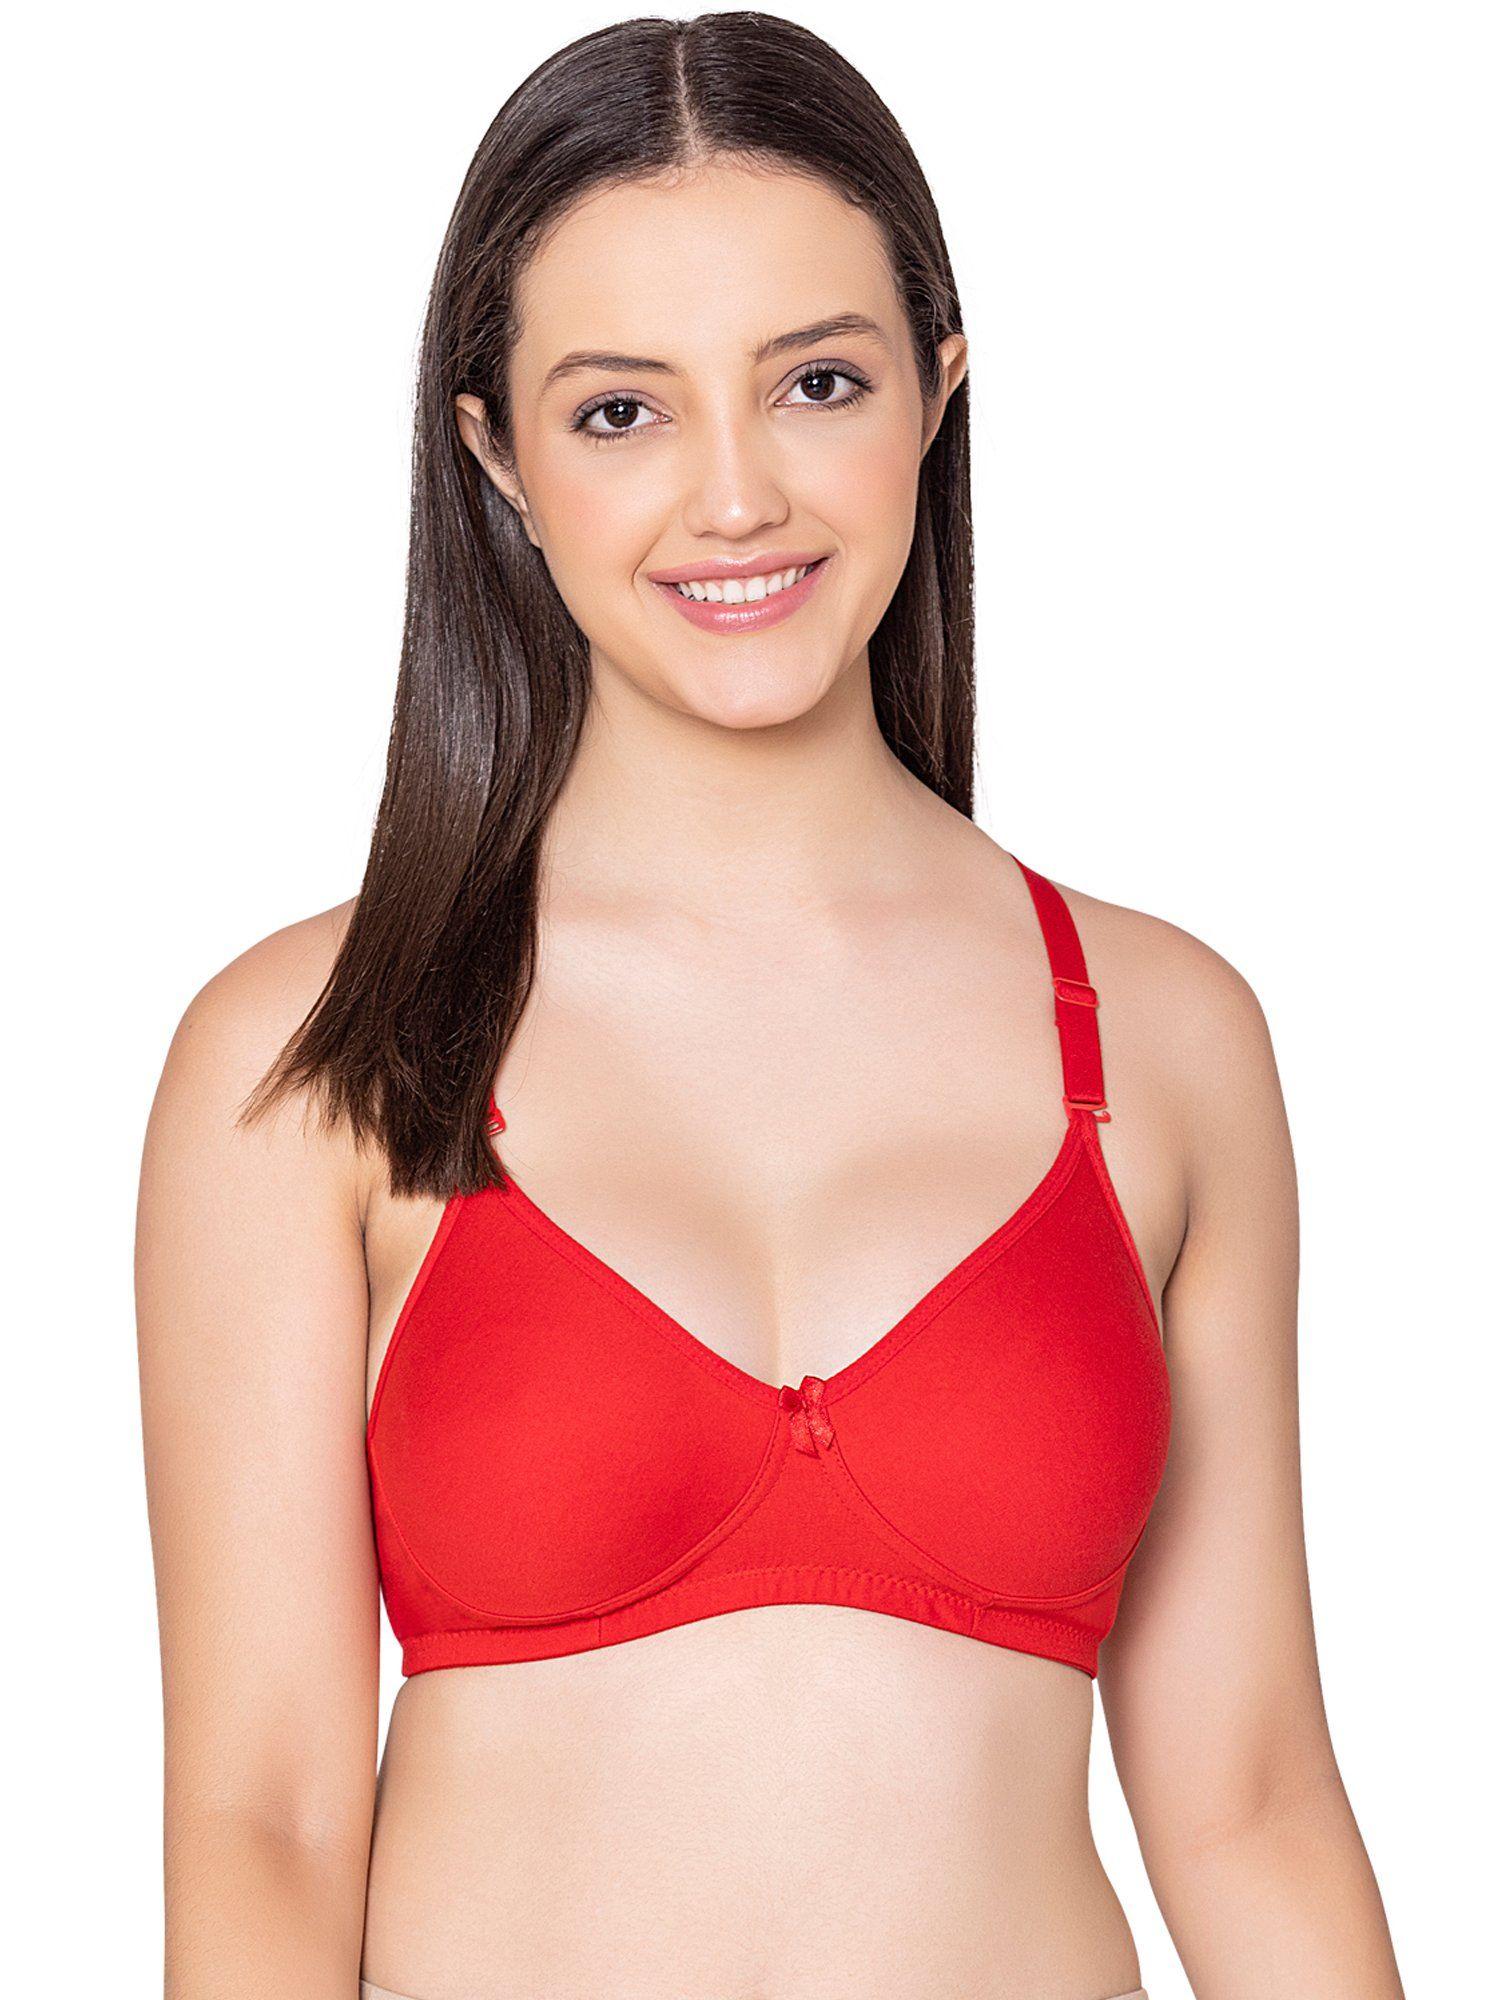 polycotton-red-color-bra-6594red